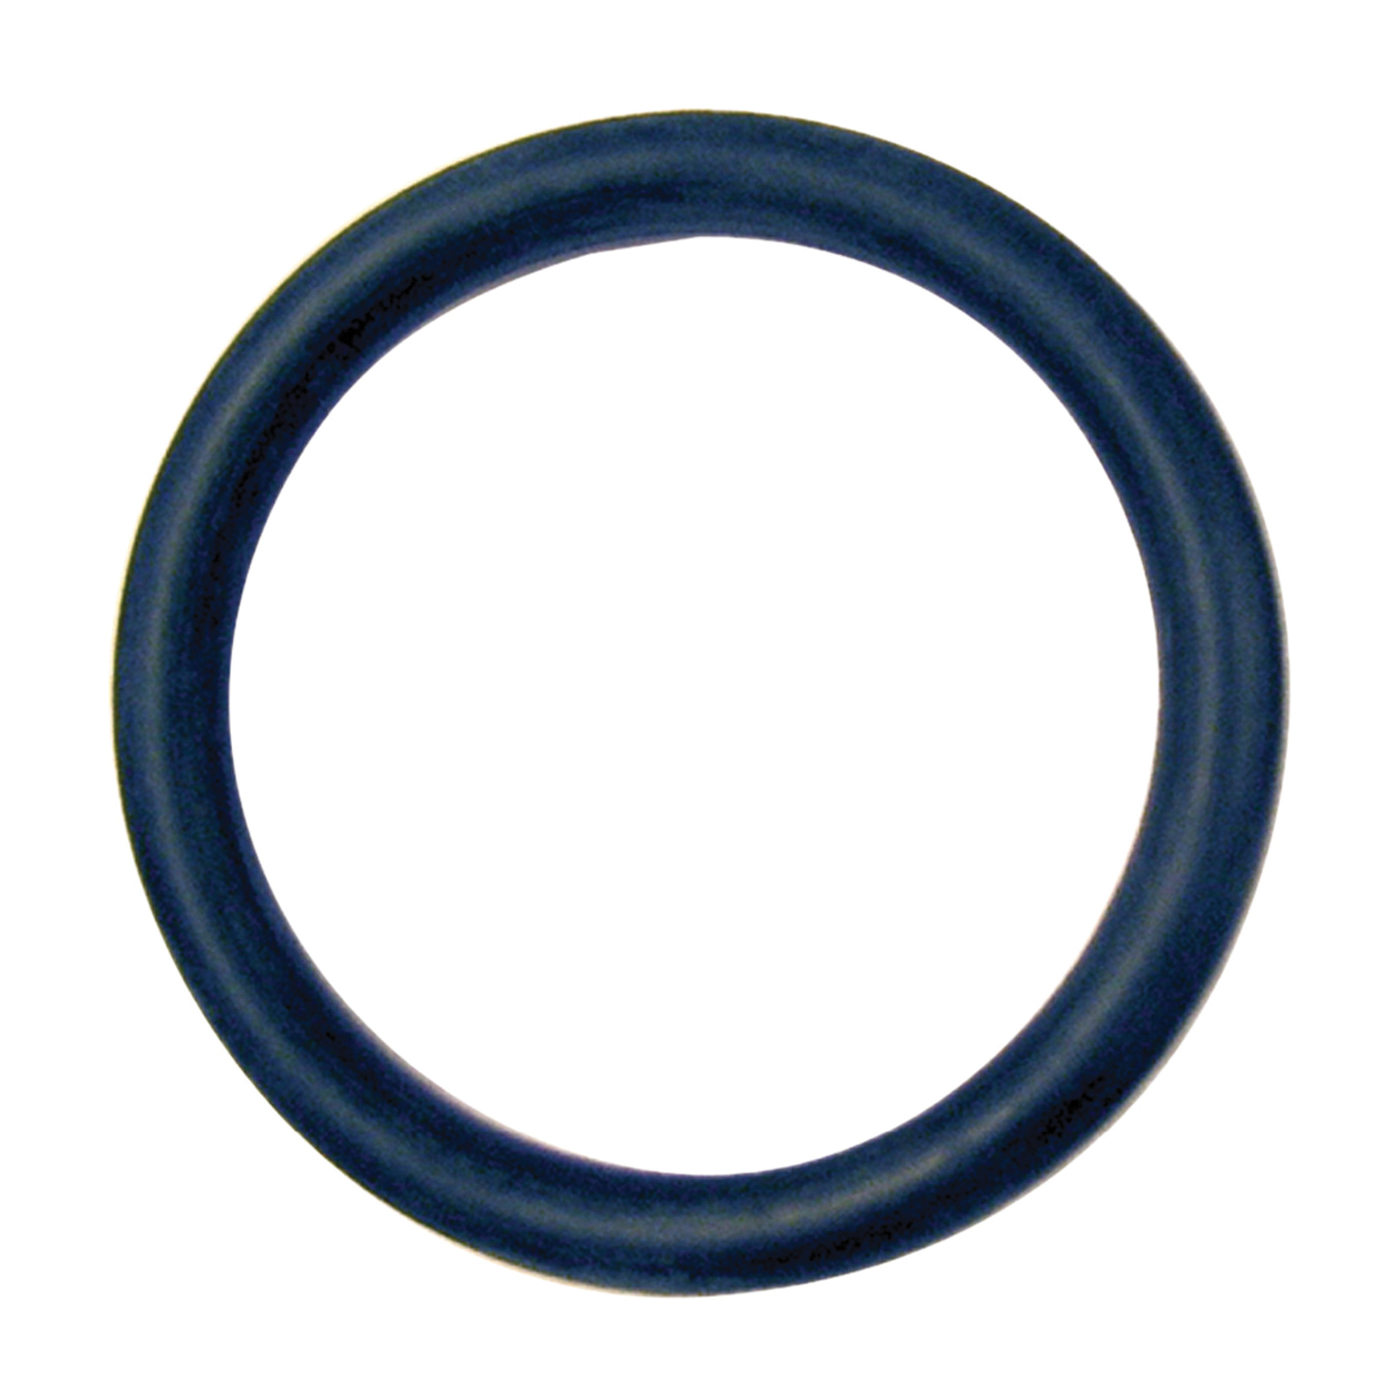 780047 Faucet O-Ring, 1-1/8 in ID x 1 in OD Dia, 1/16 in Thick